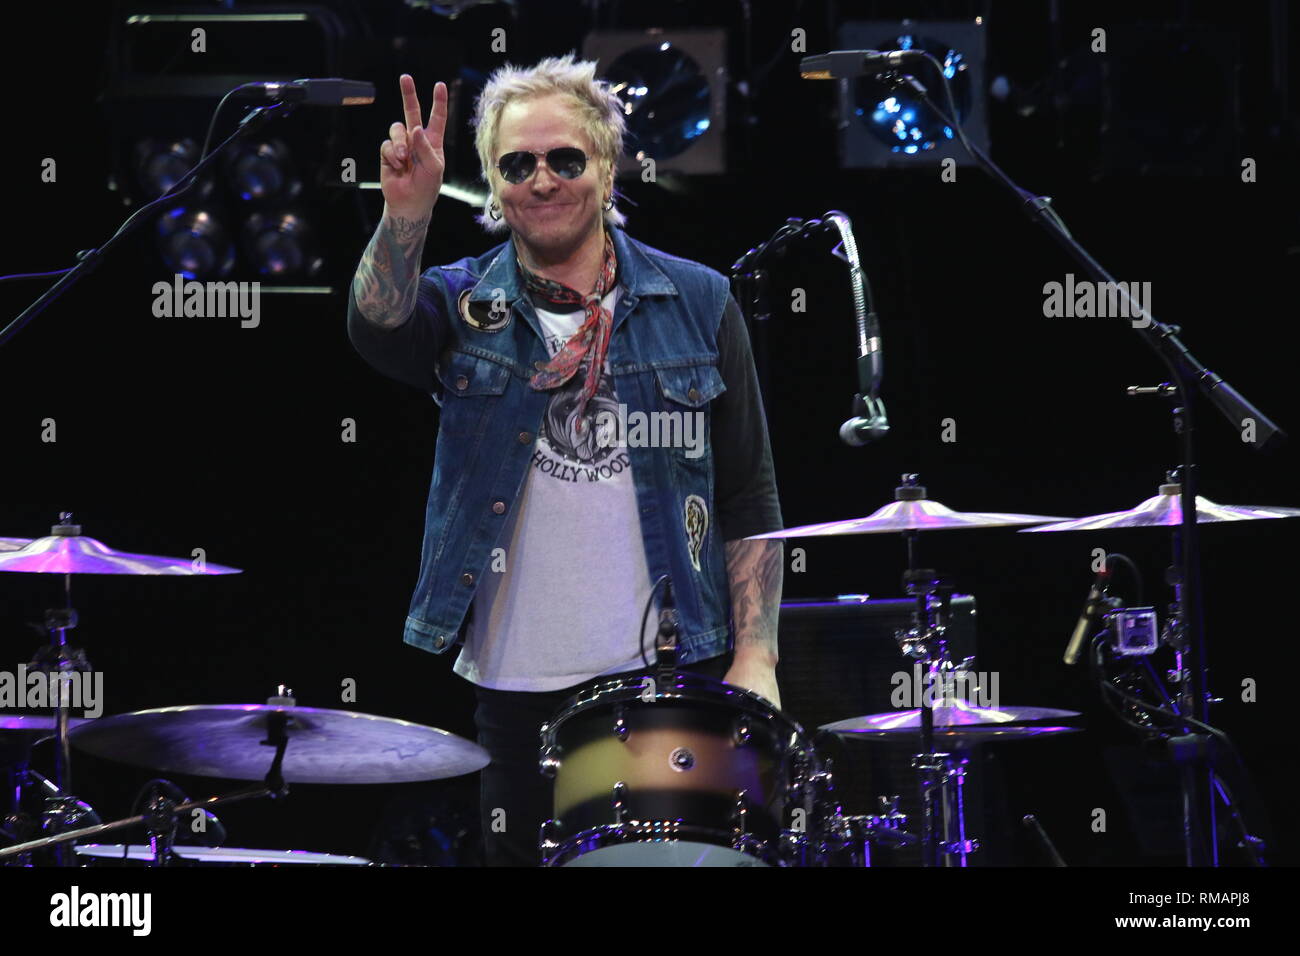 Drummer Matt Sorum is shown performing on stage during a 'live' concert with the Kings of Kaos. Stock Photo